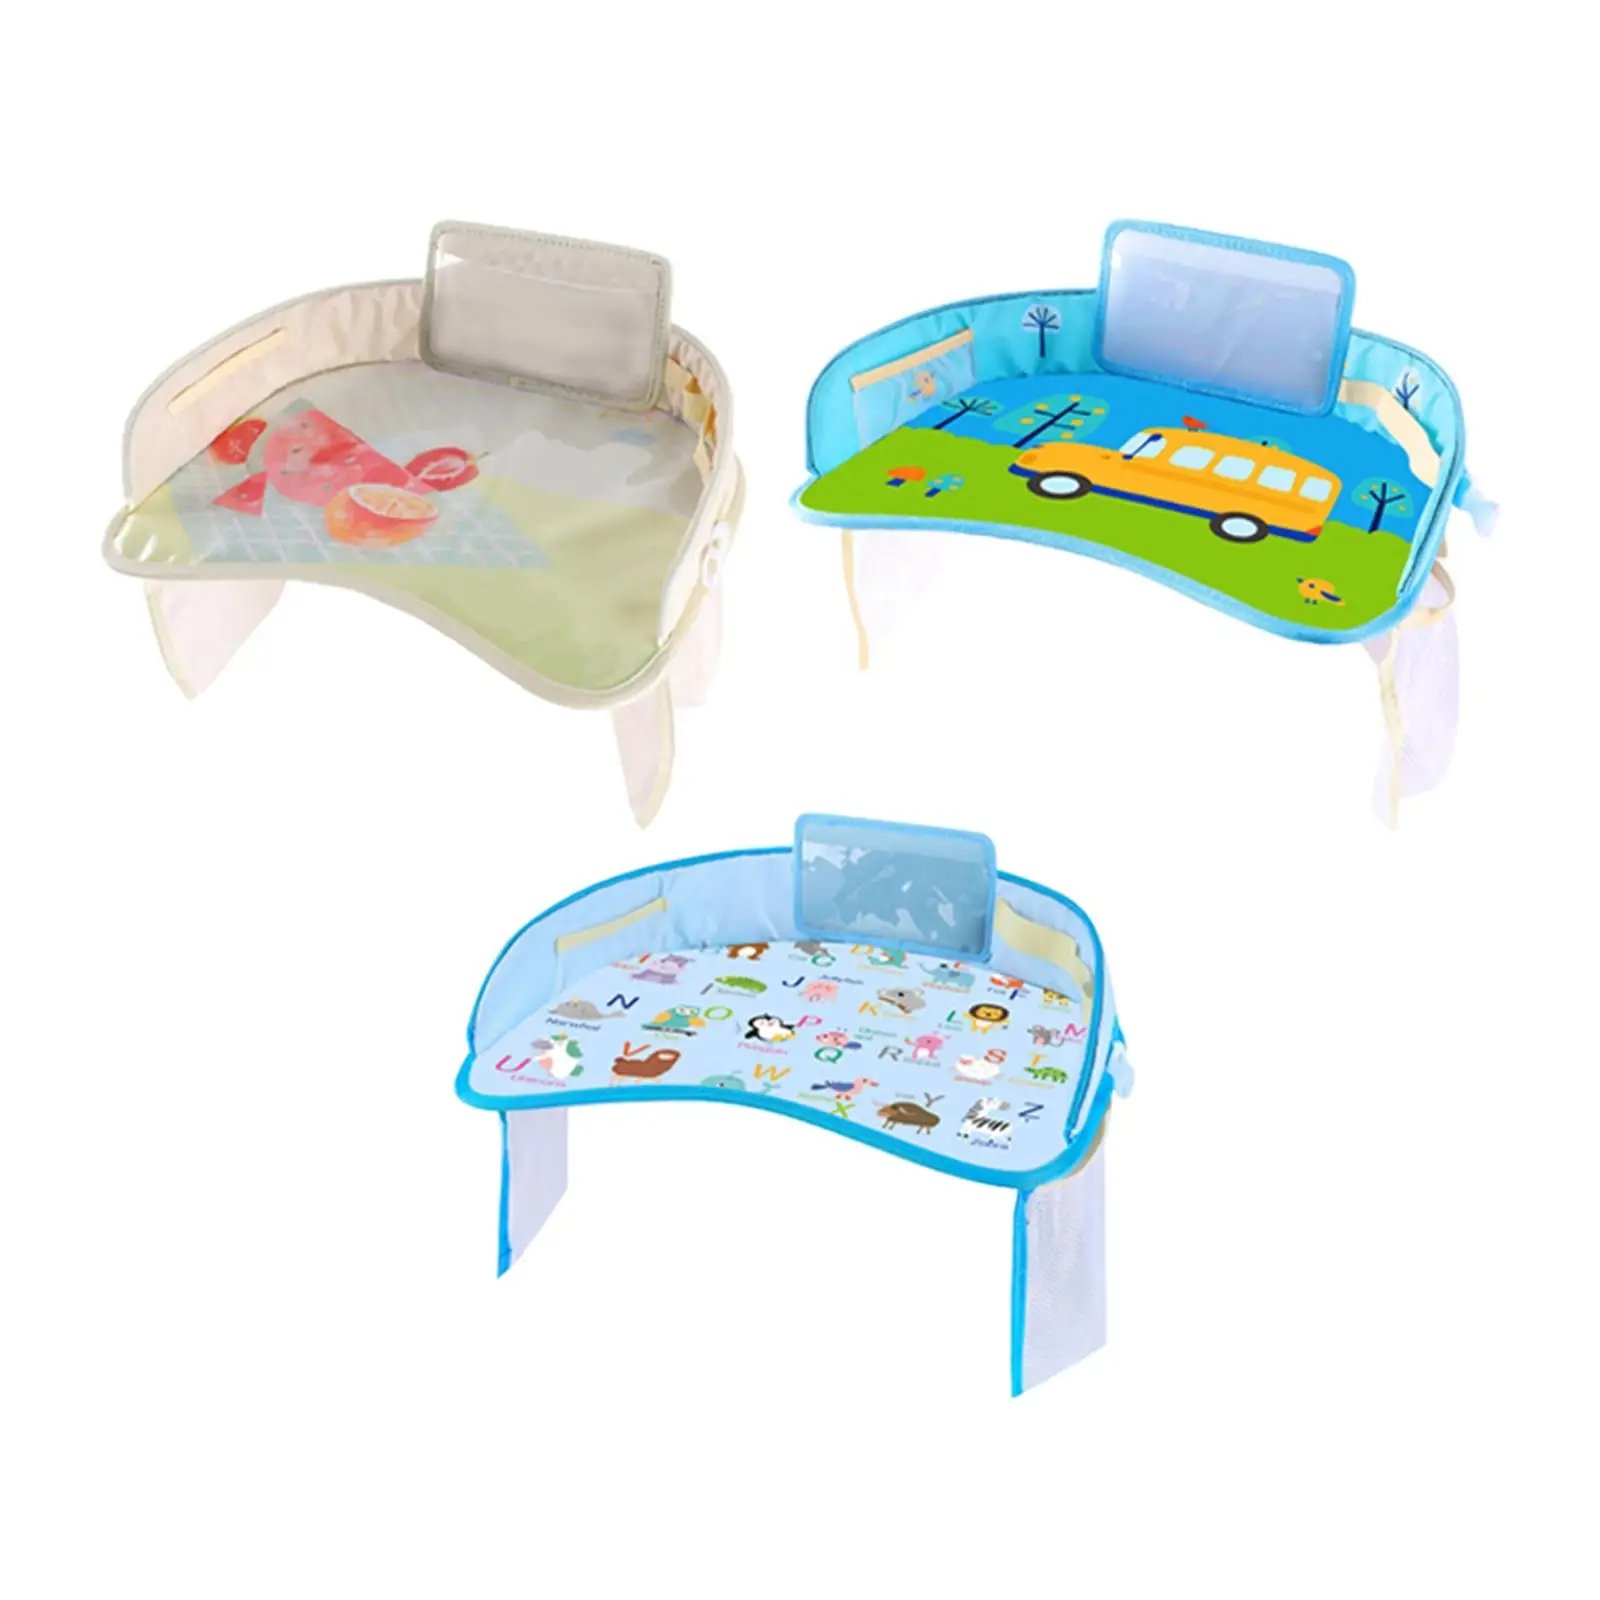  Tray for Toddler ,  Lap Tray for Girl and Boy Activities,  Large Tablet Holder Stand  Pocket